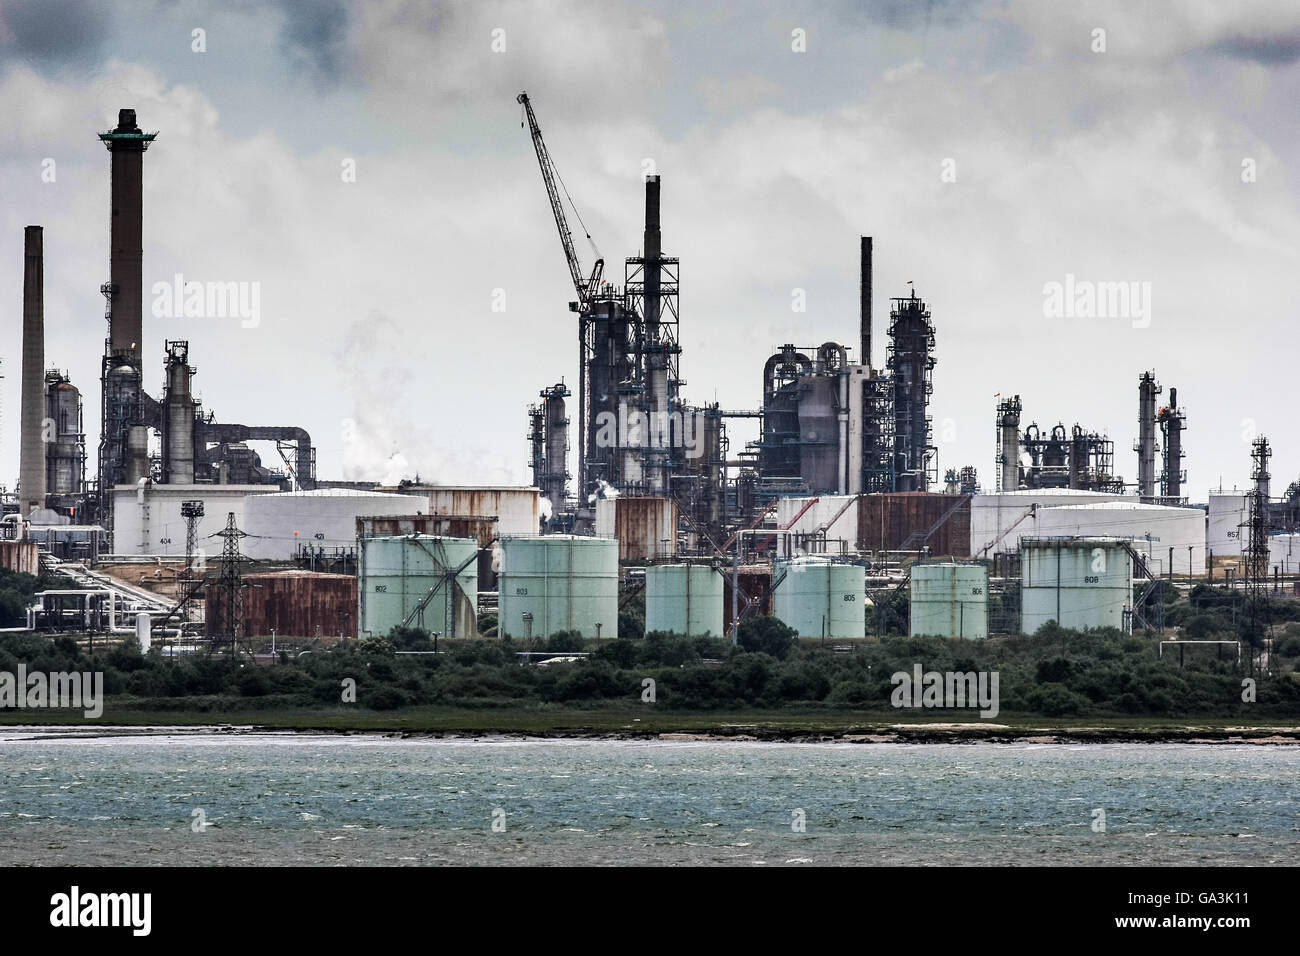 Fawley Refinery is an oil refinery located at Fawley, Hampshire, England. The refinery is owned by Esso, Stock Photo